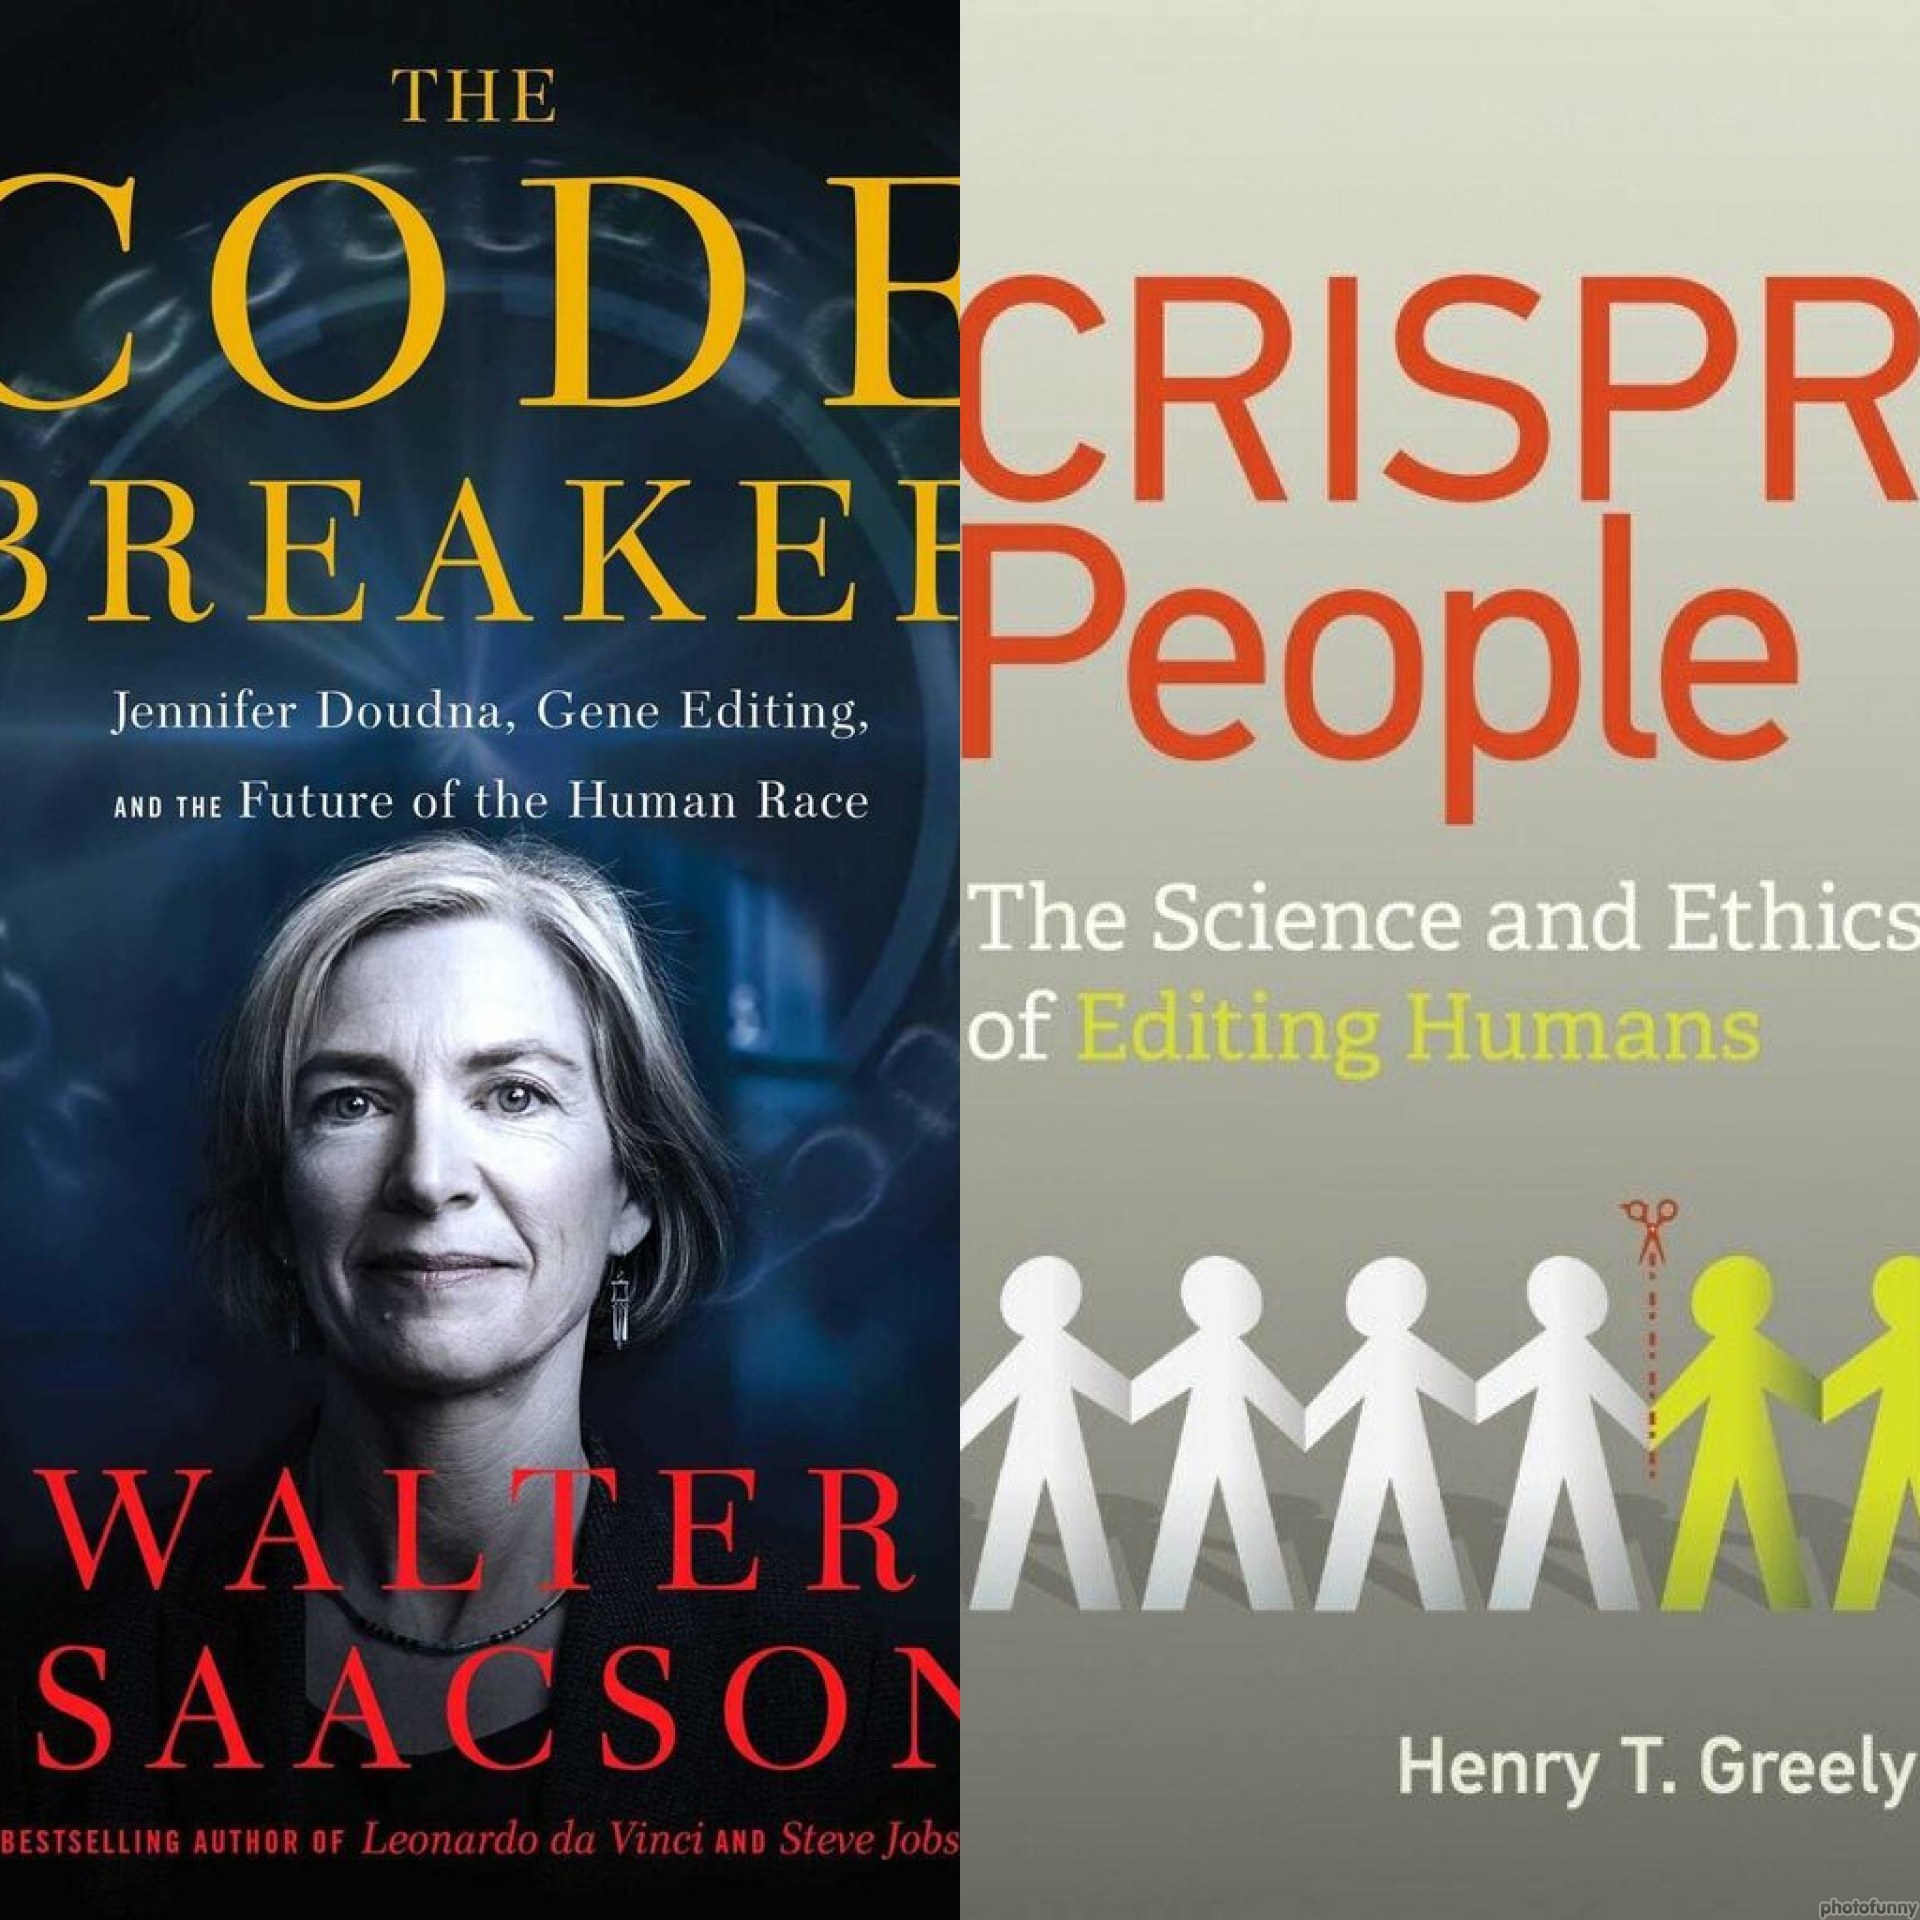 Covers of "Code Breaker" and "CRISPR People" side by side